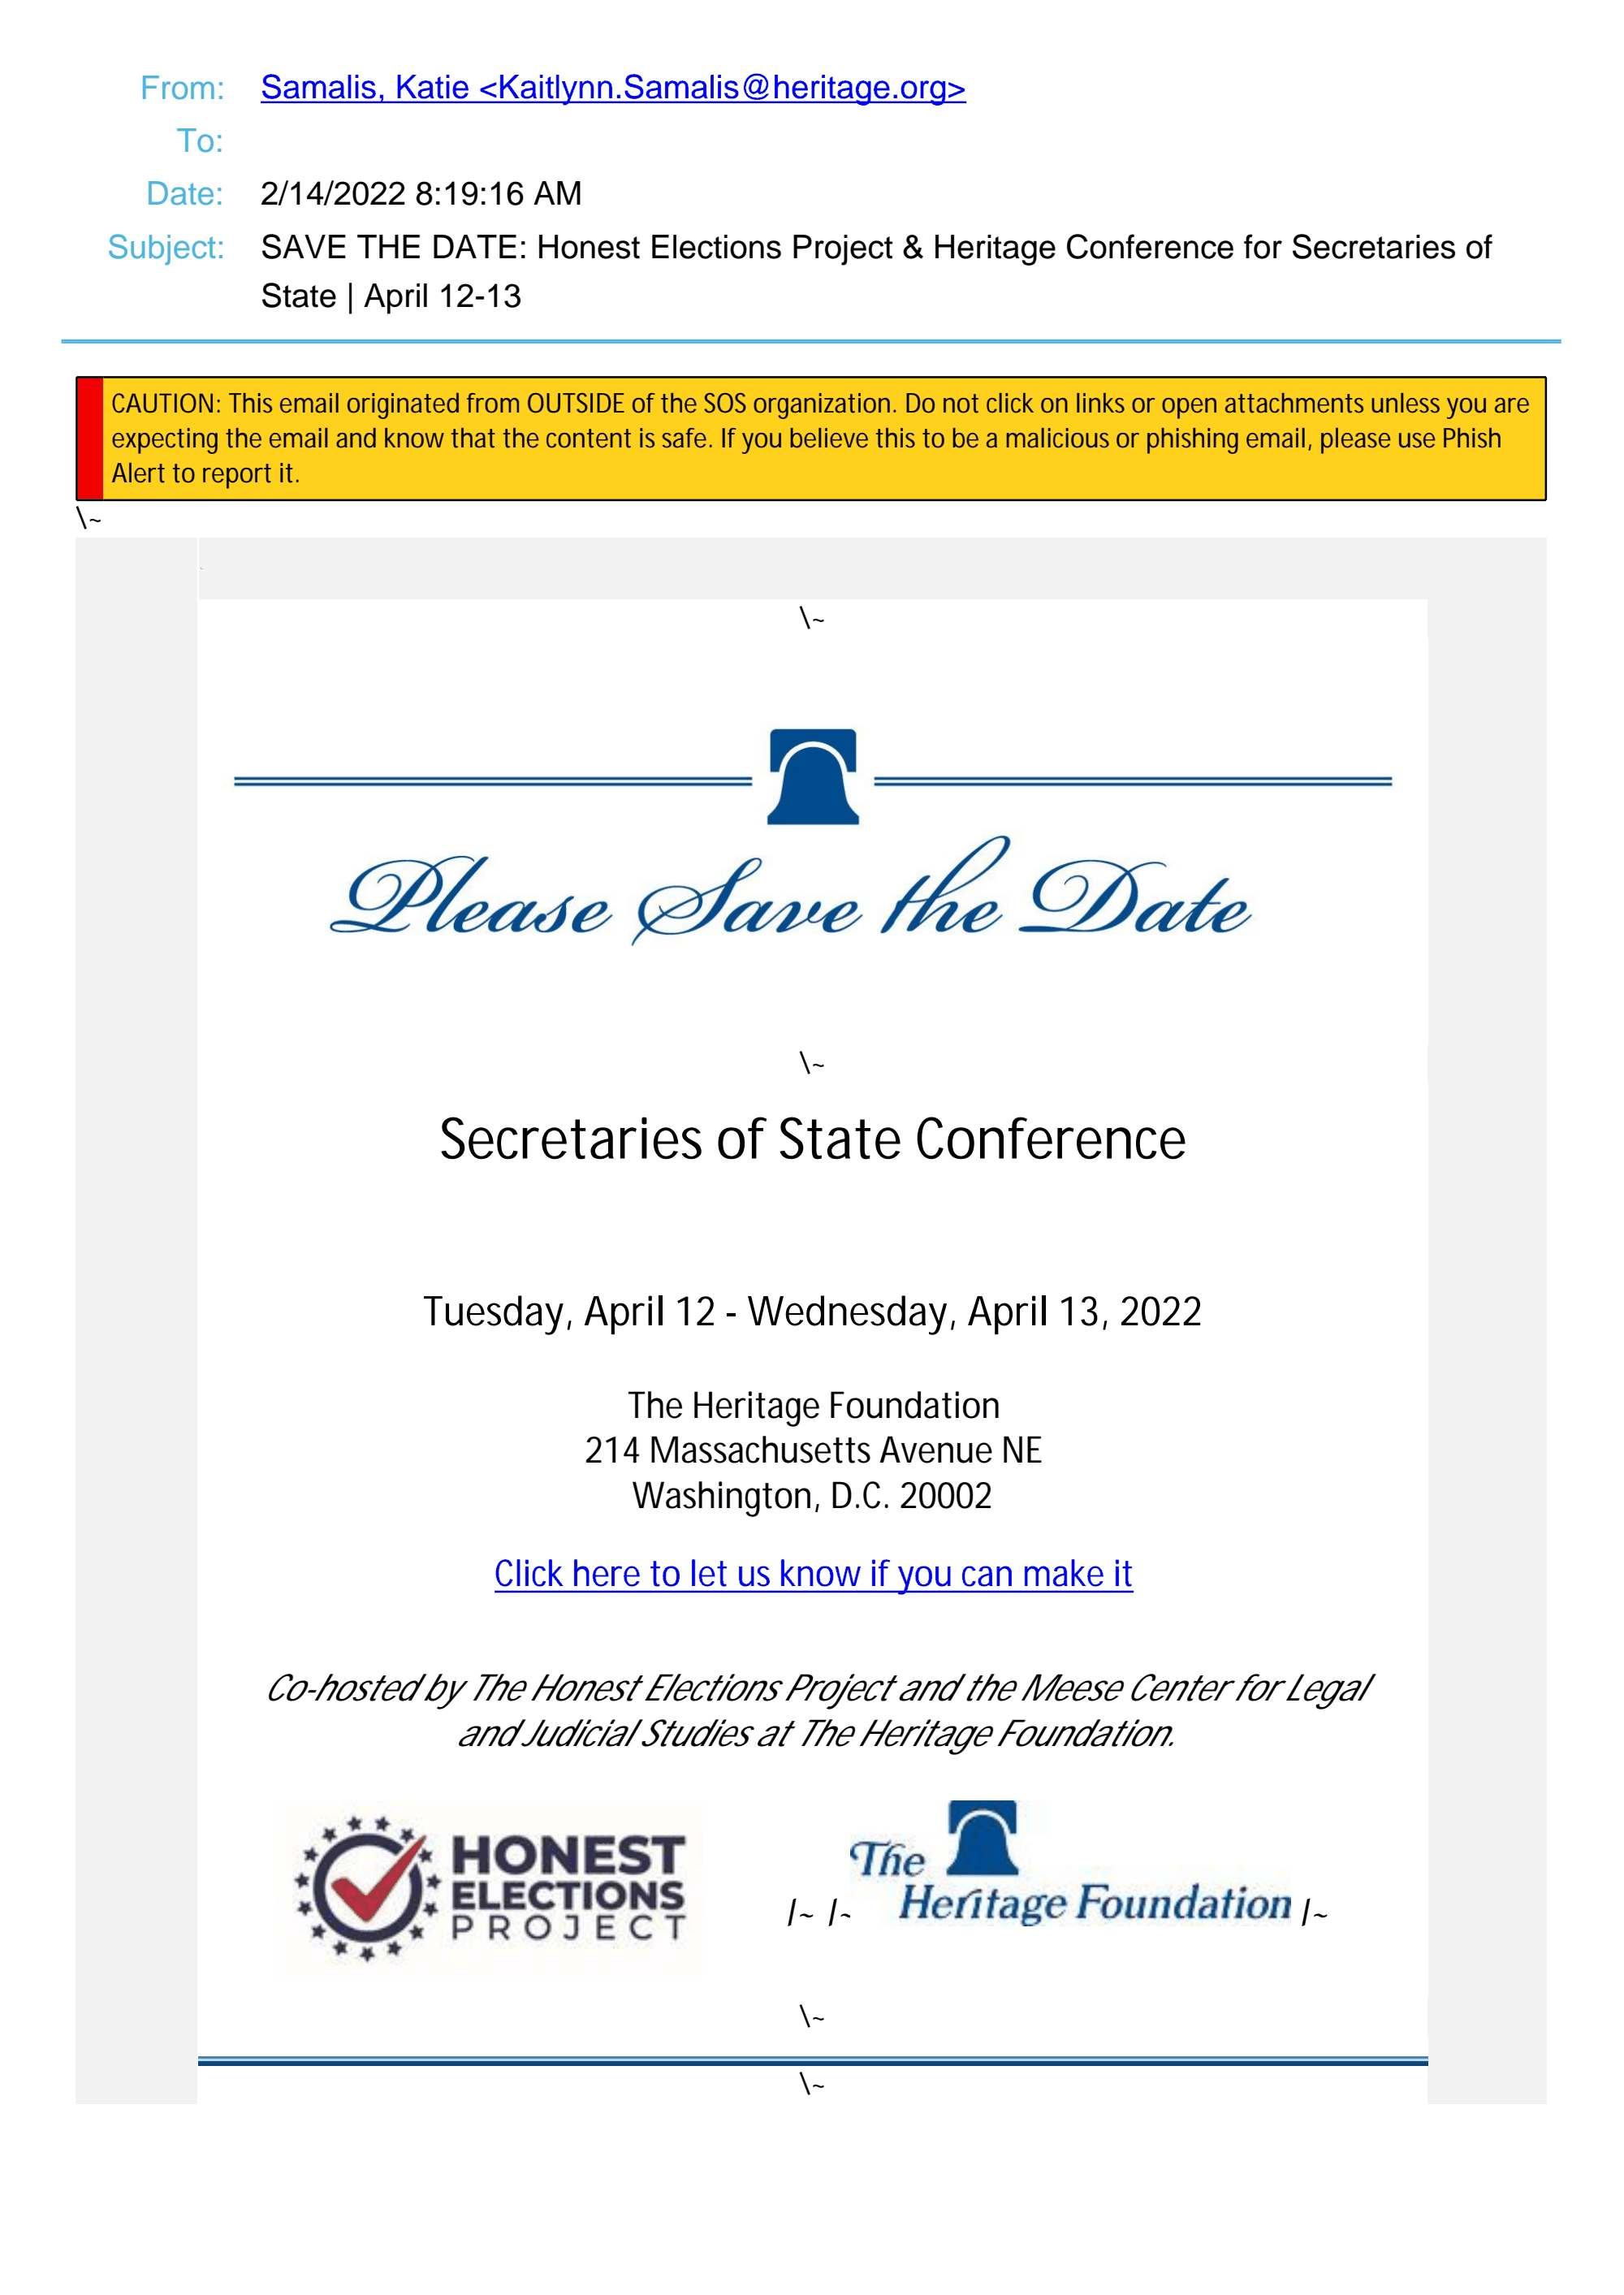 Page 1 of Honest Elections Project and Heritage Foundation "Secretaries of State Conference" Save the Date, April 12-14, 2022